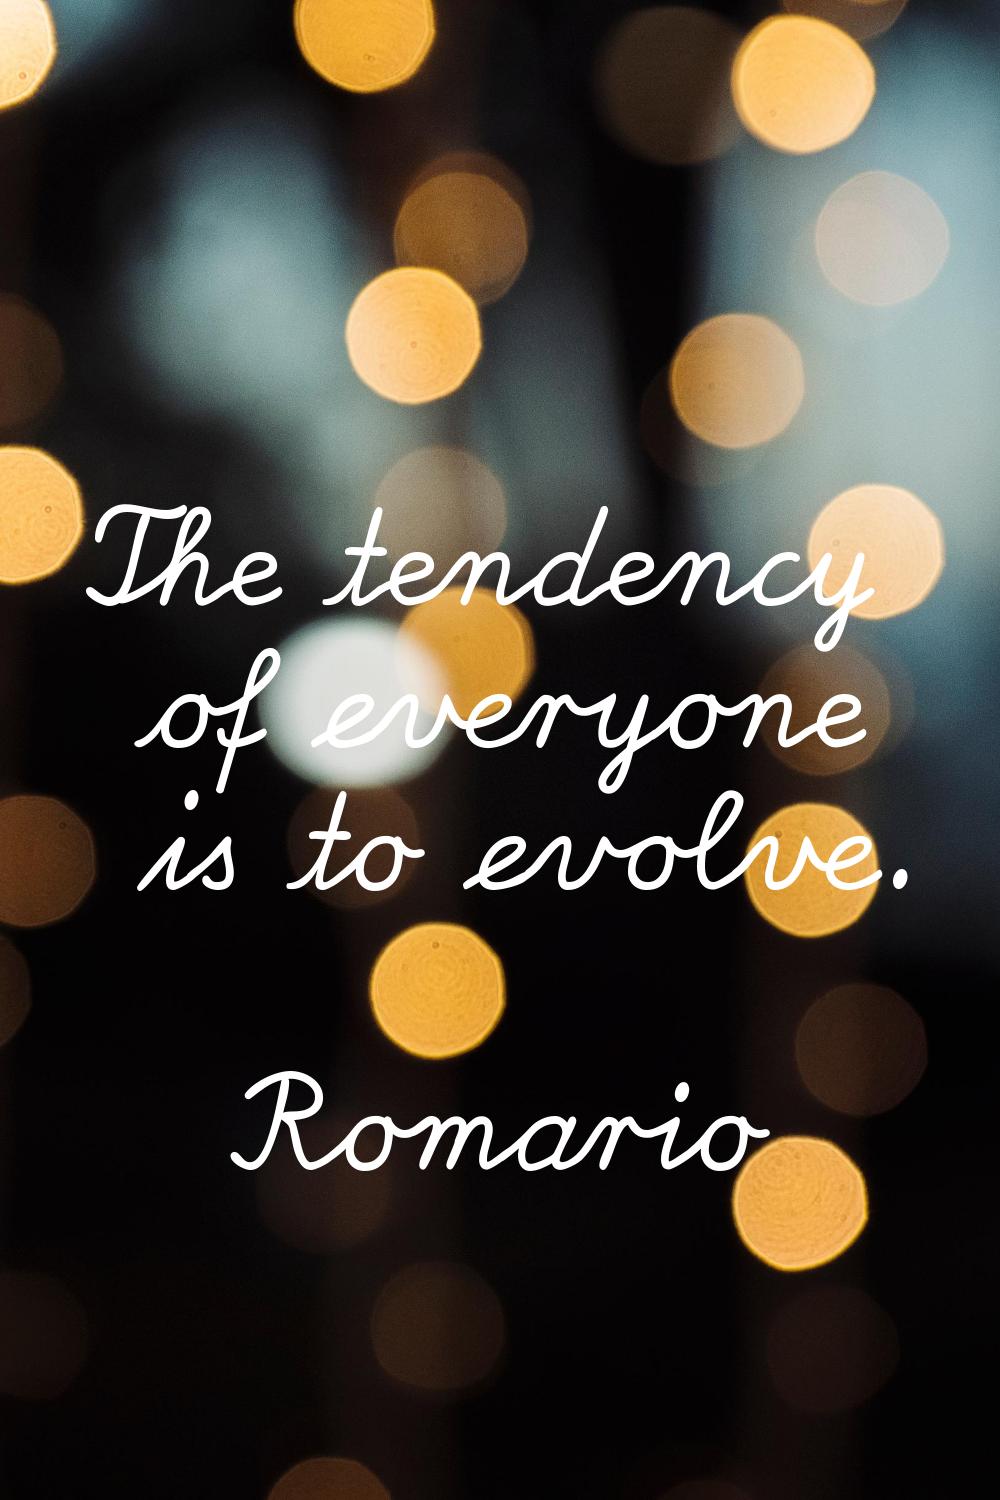 The tendency of everyone is to evolve.